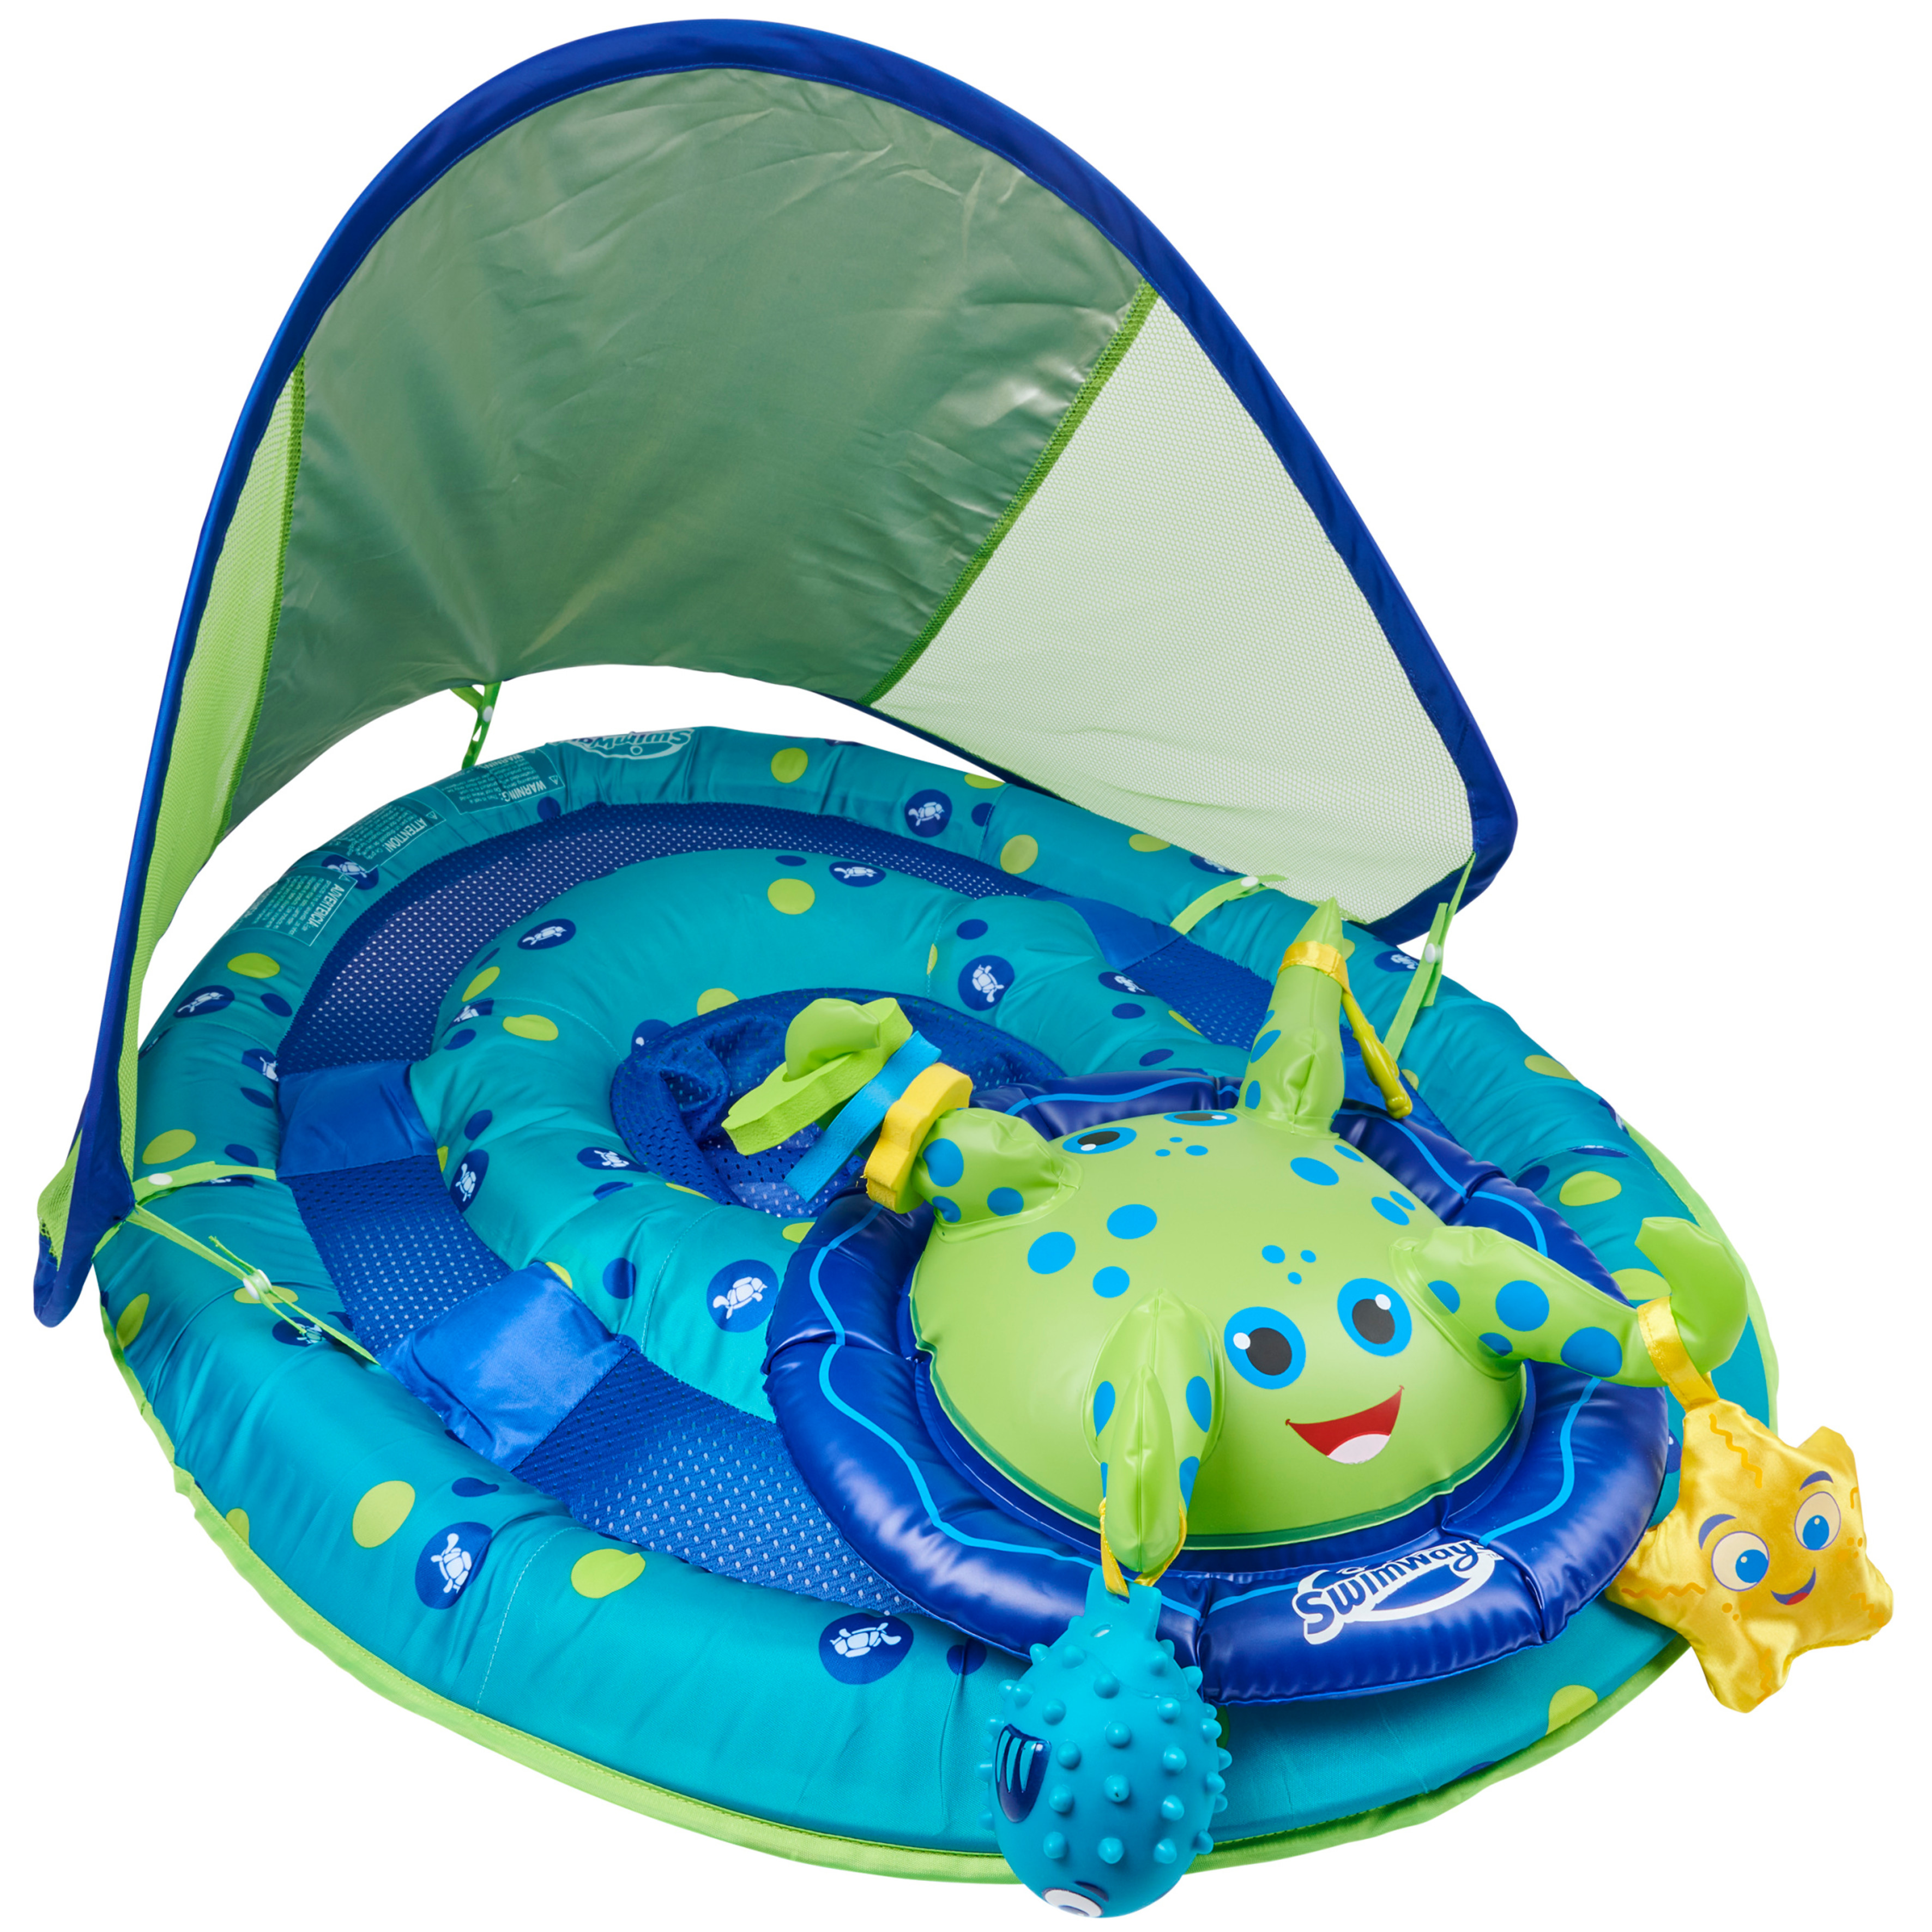 SwimWays Baby Spring Float Activity Center, Inflatable Float for Baby Boys, Blue/Green - image 1 of 8